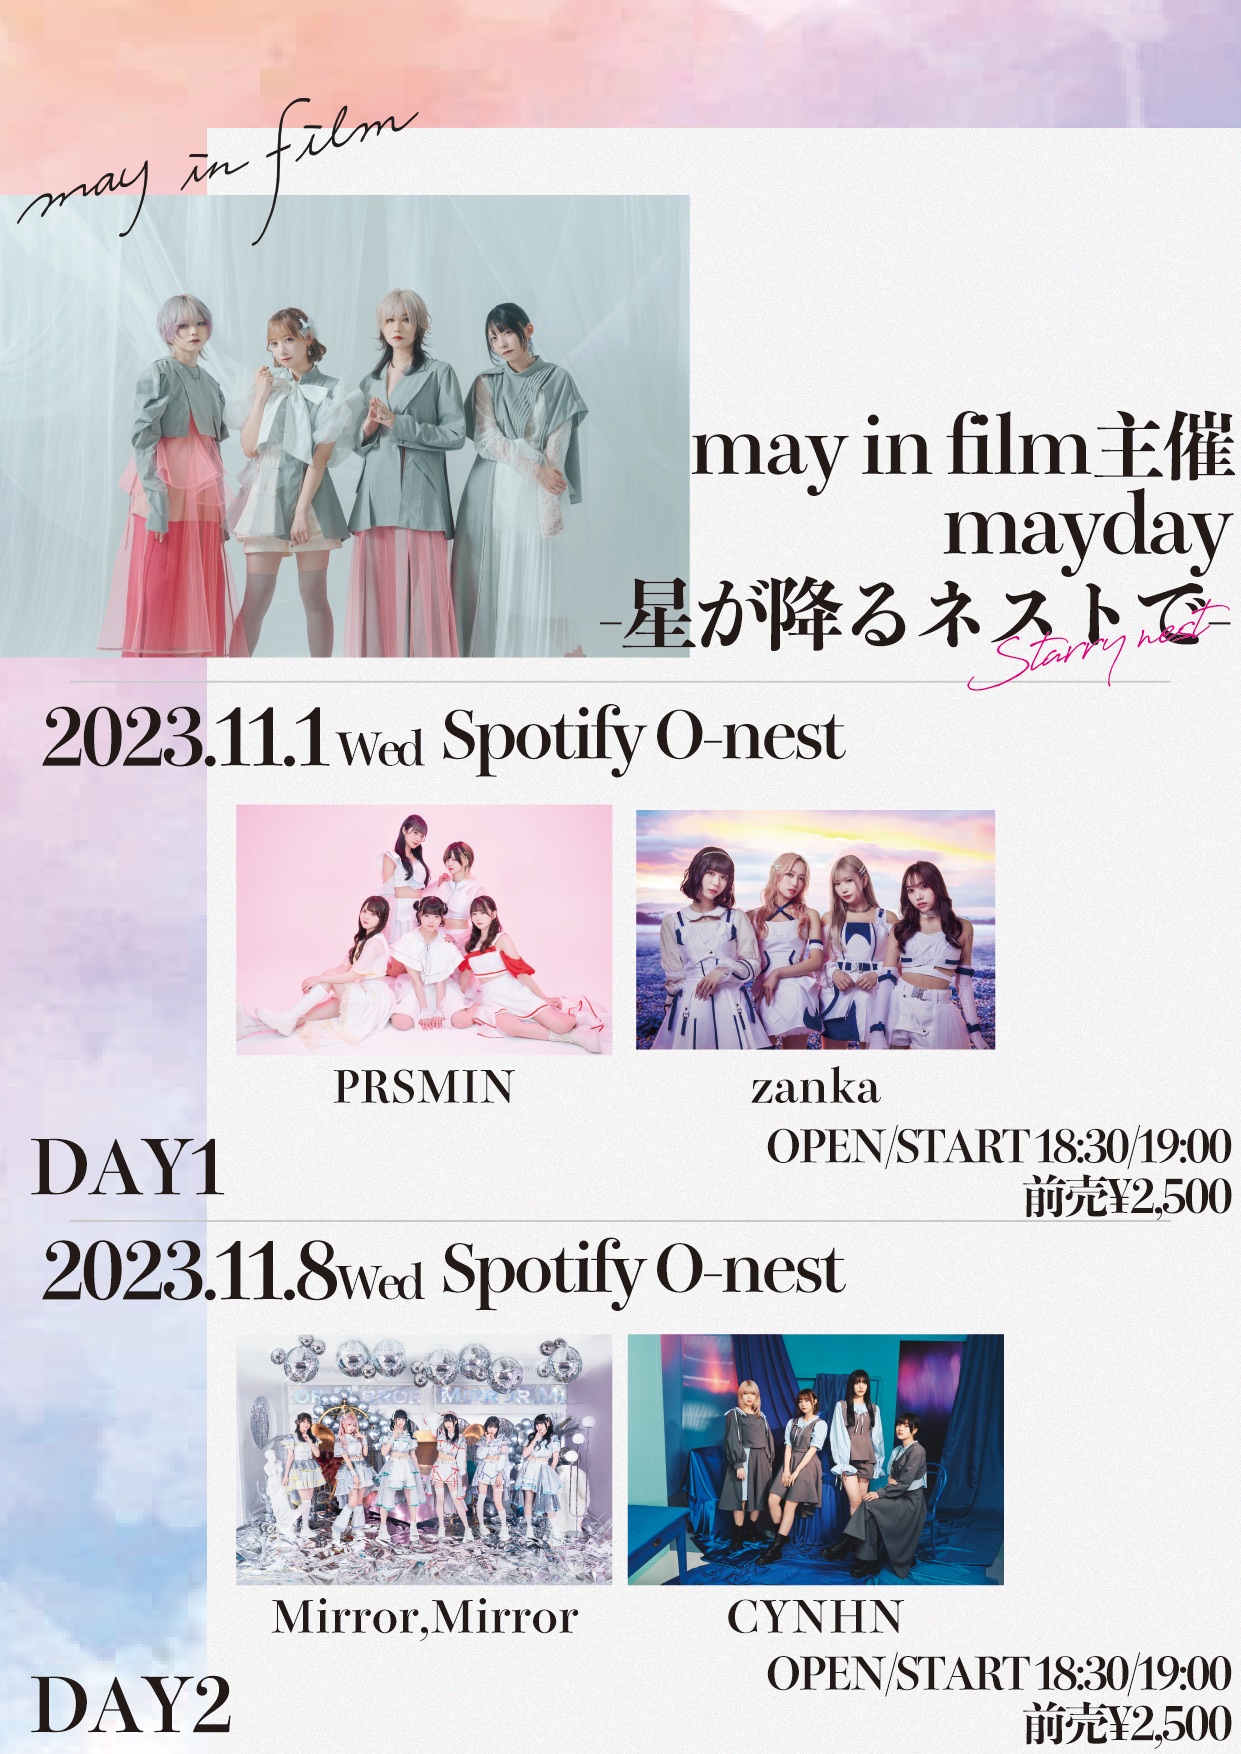 may in film主催”mayday-星の降るネストで-DAY2"